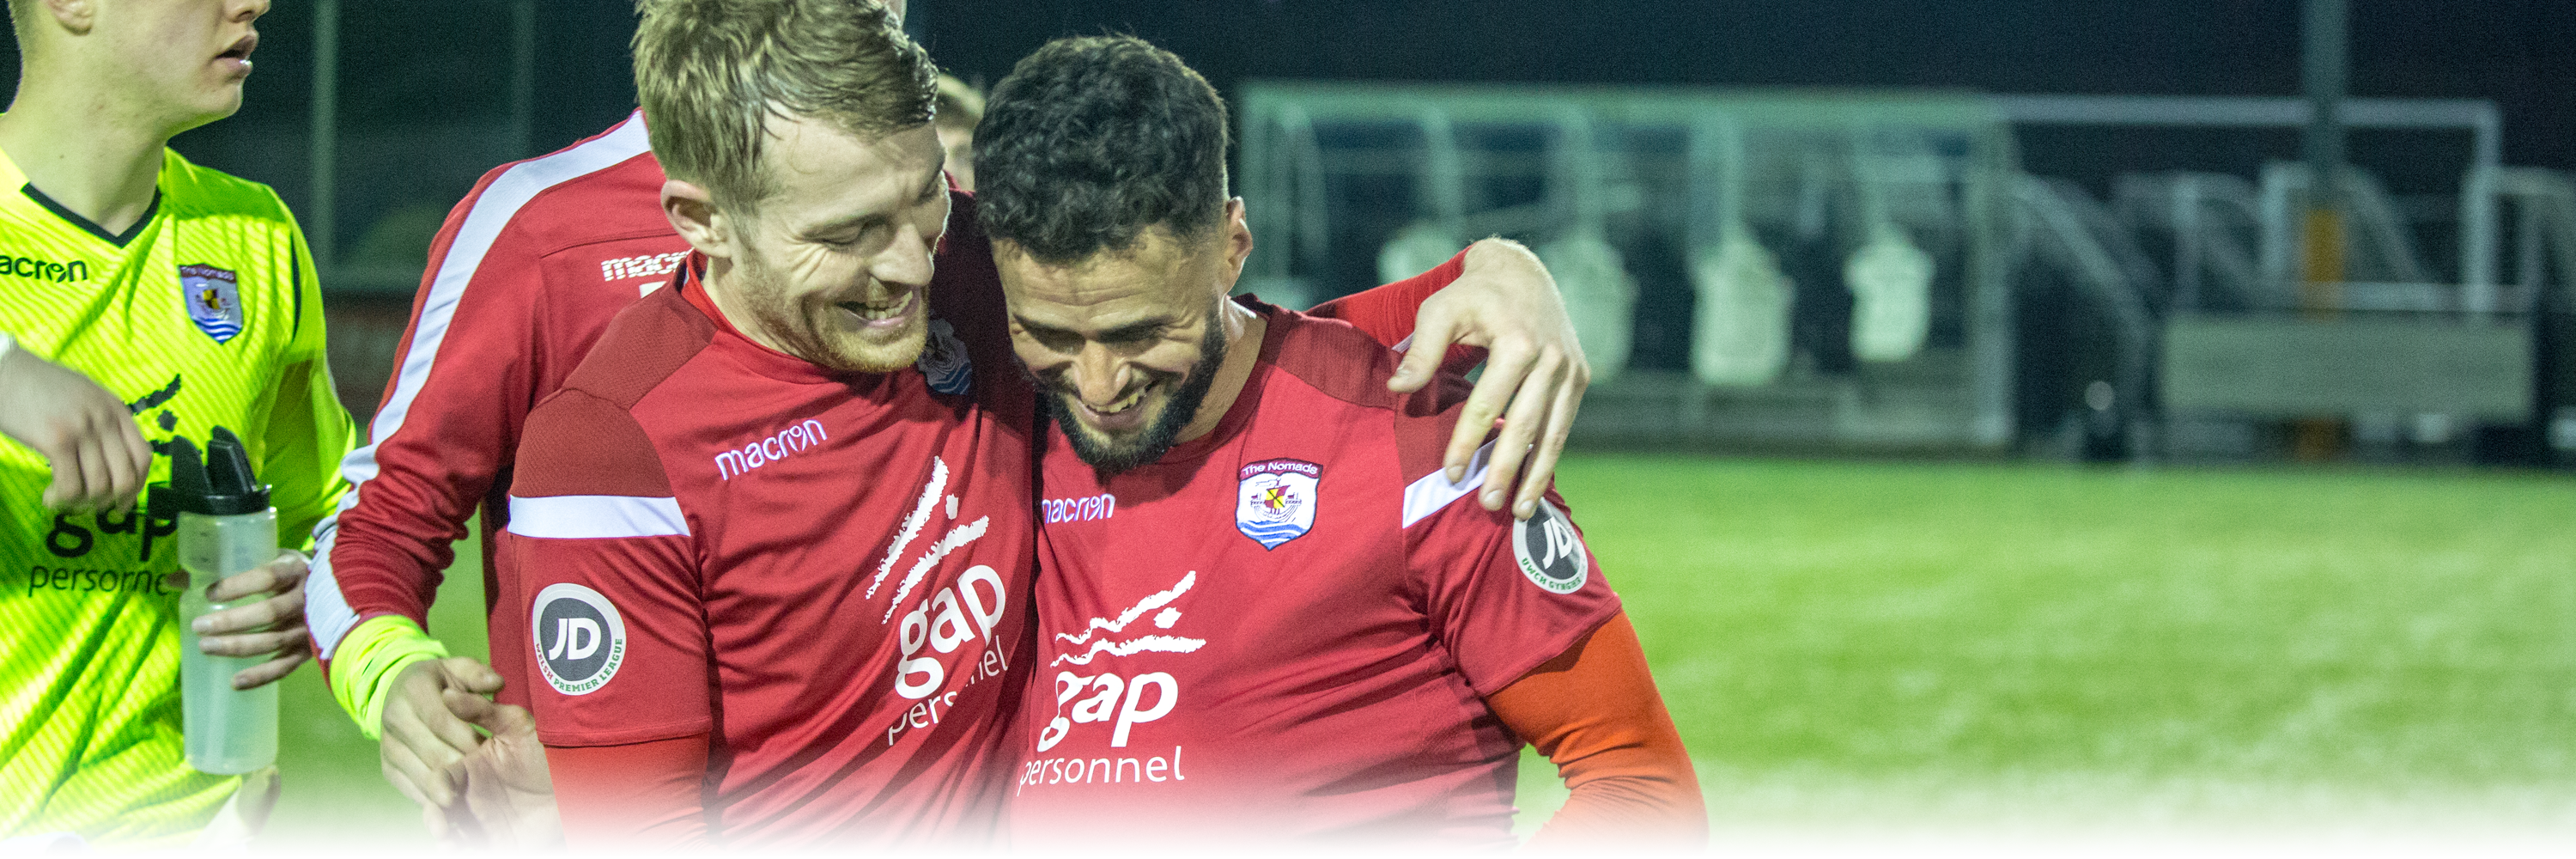 John Disney (left) and Nathan Woolfe (right) celebrate at full time | © NCM Media